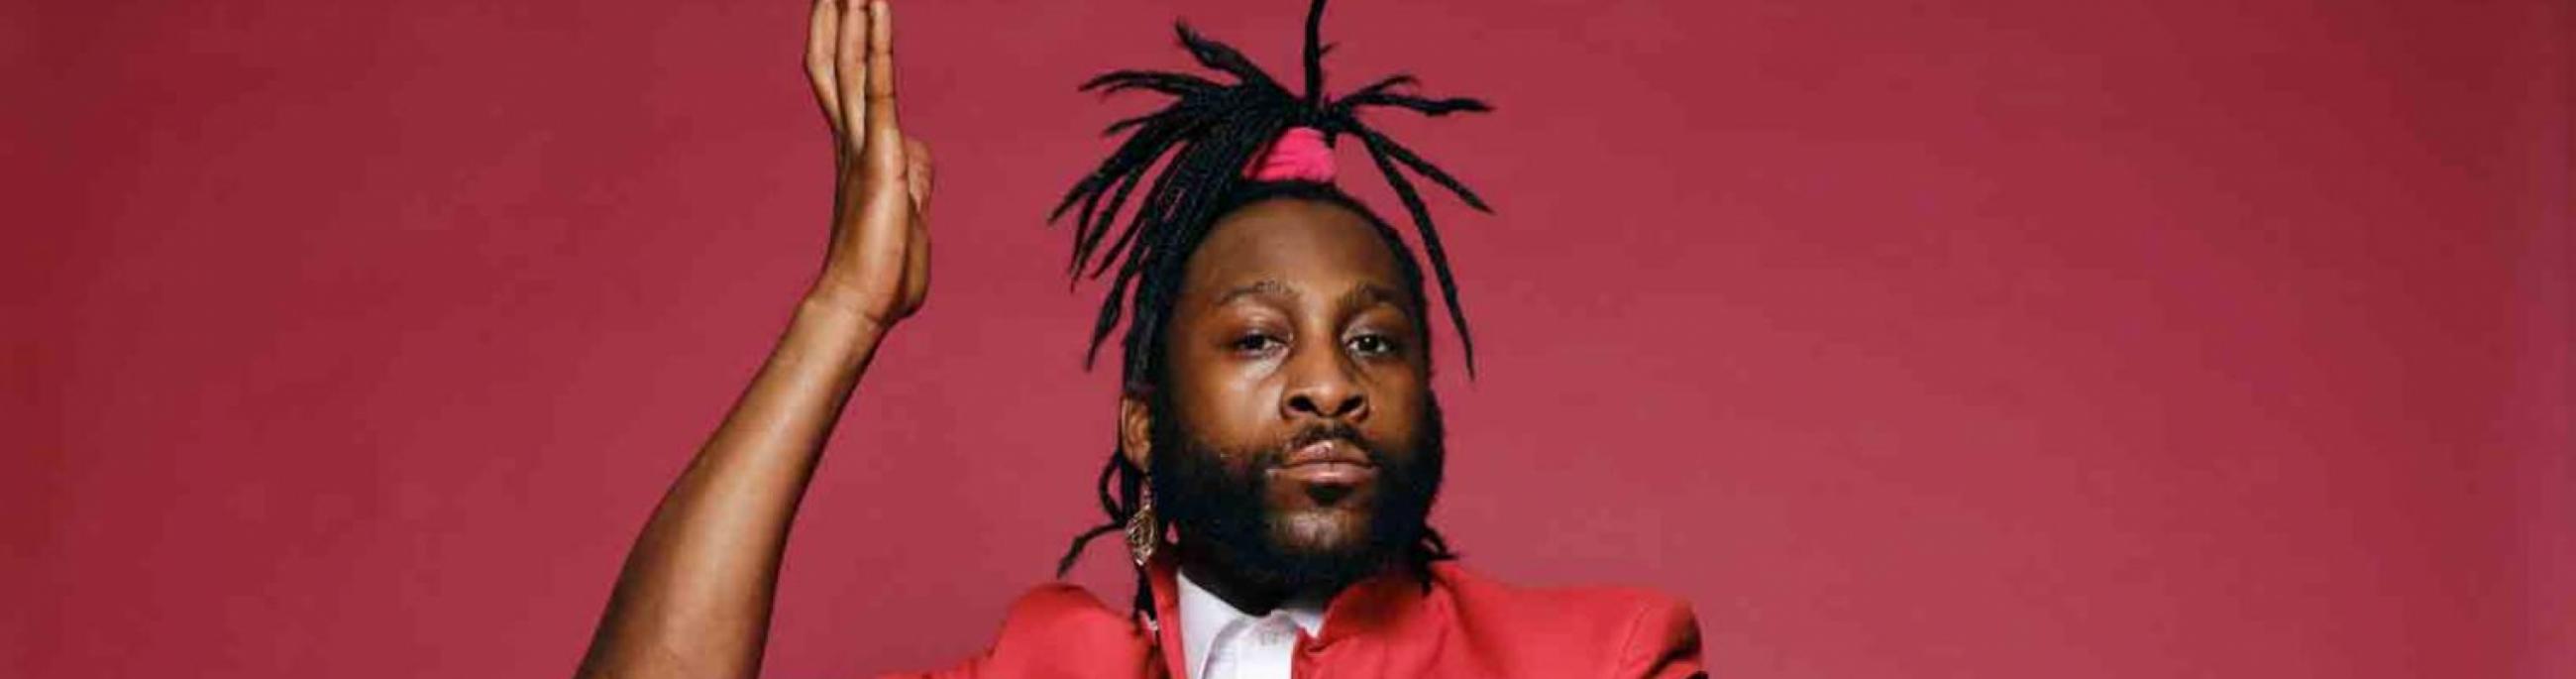 A man with dreadlocks in a ponytail wears a red suit, sitting on a chair in front of a red background. He looks at the camera.